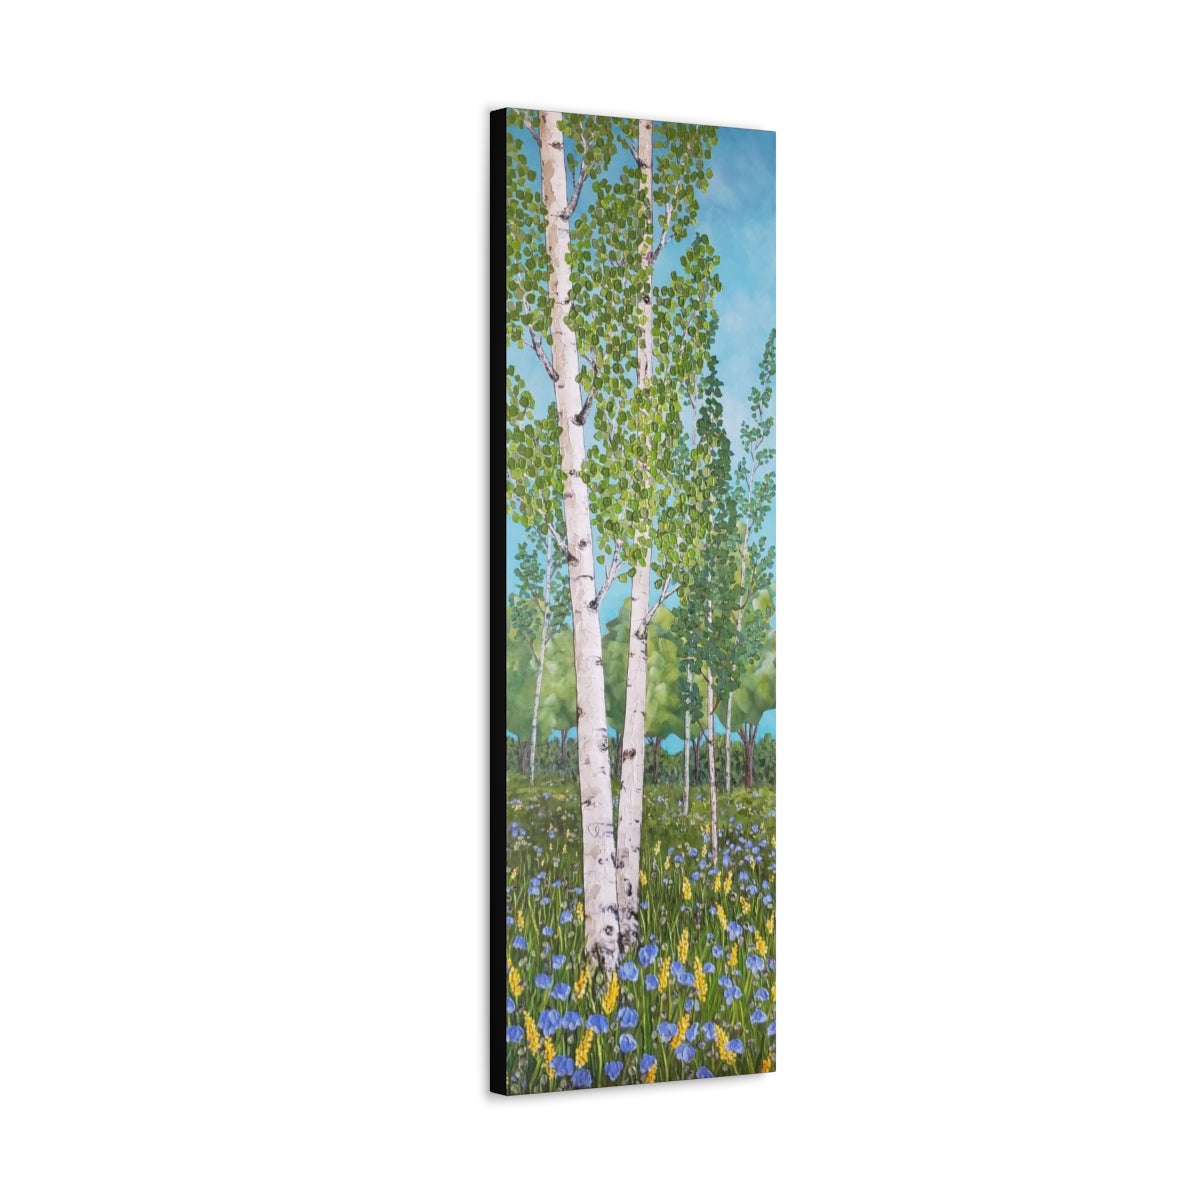 Green birch trees painting with hearts carved in to the trunk of one tree